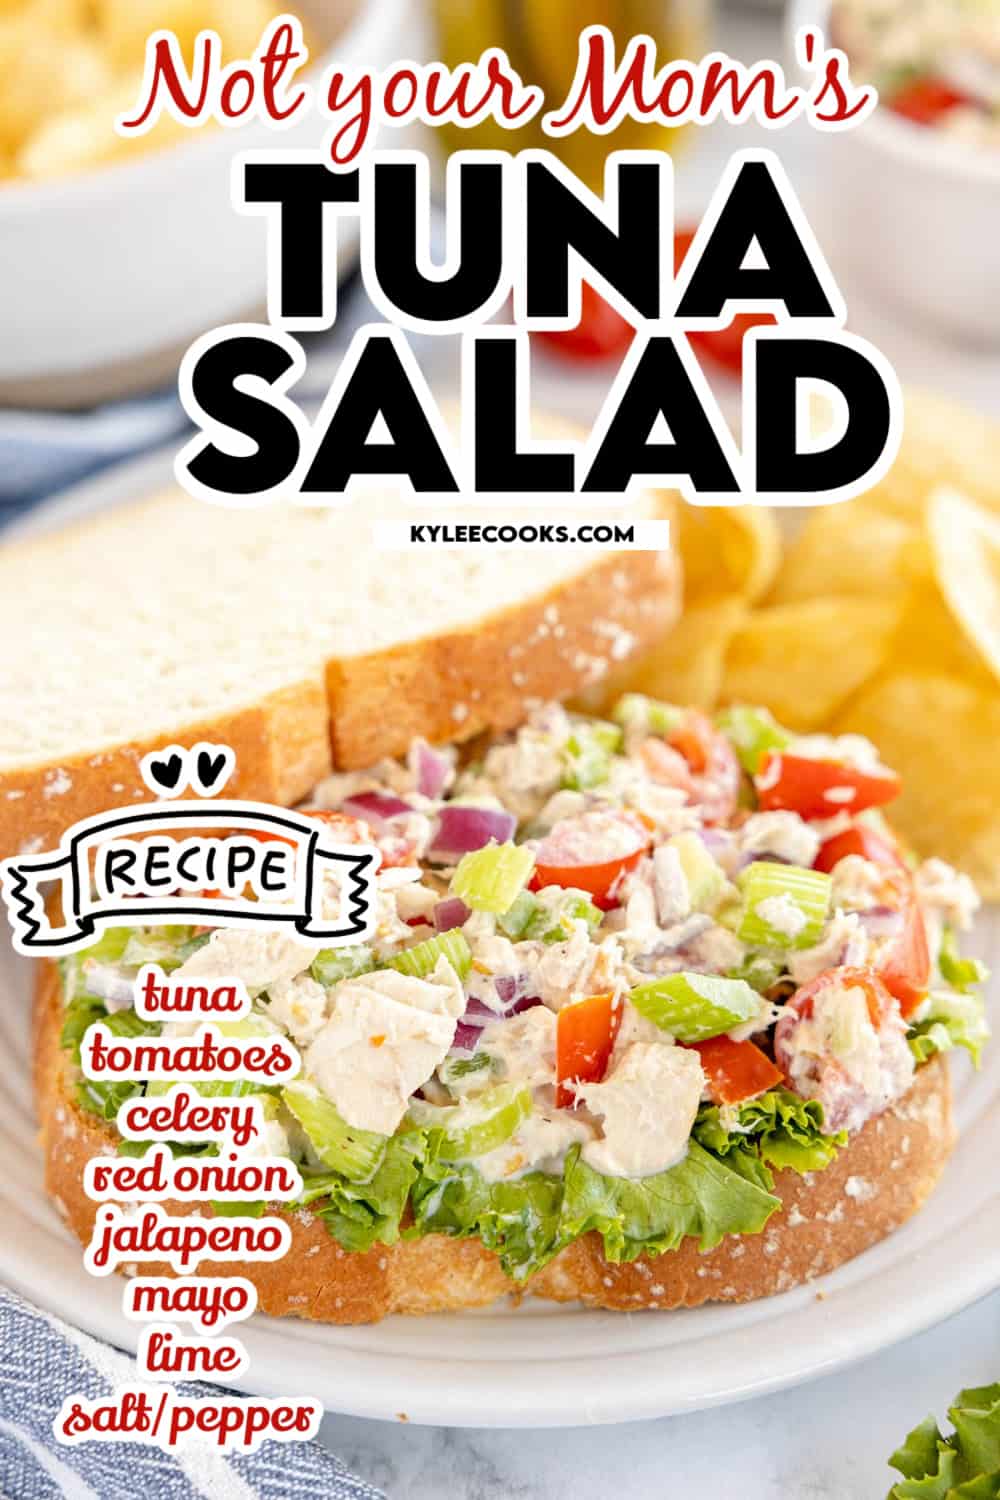 tuna salad on white bread with recipe name and ingredients overlaid in text.